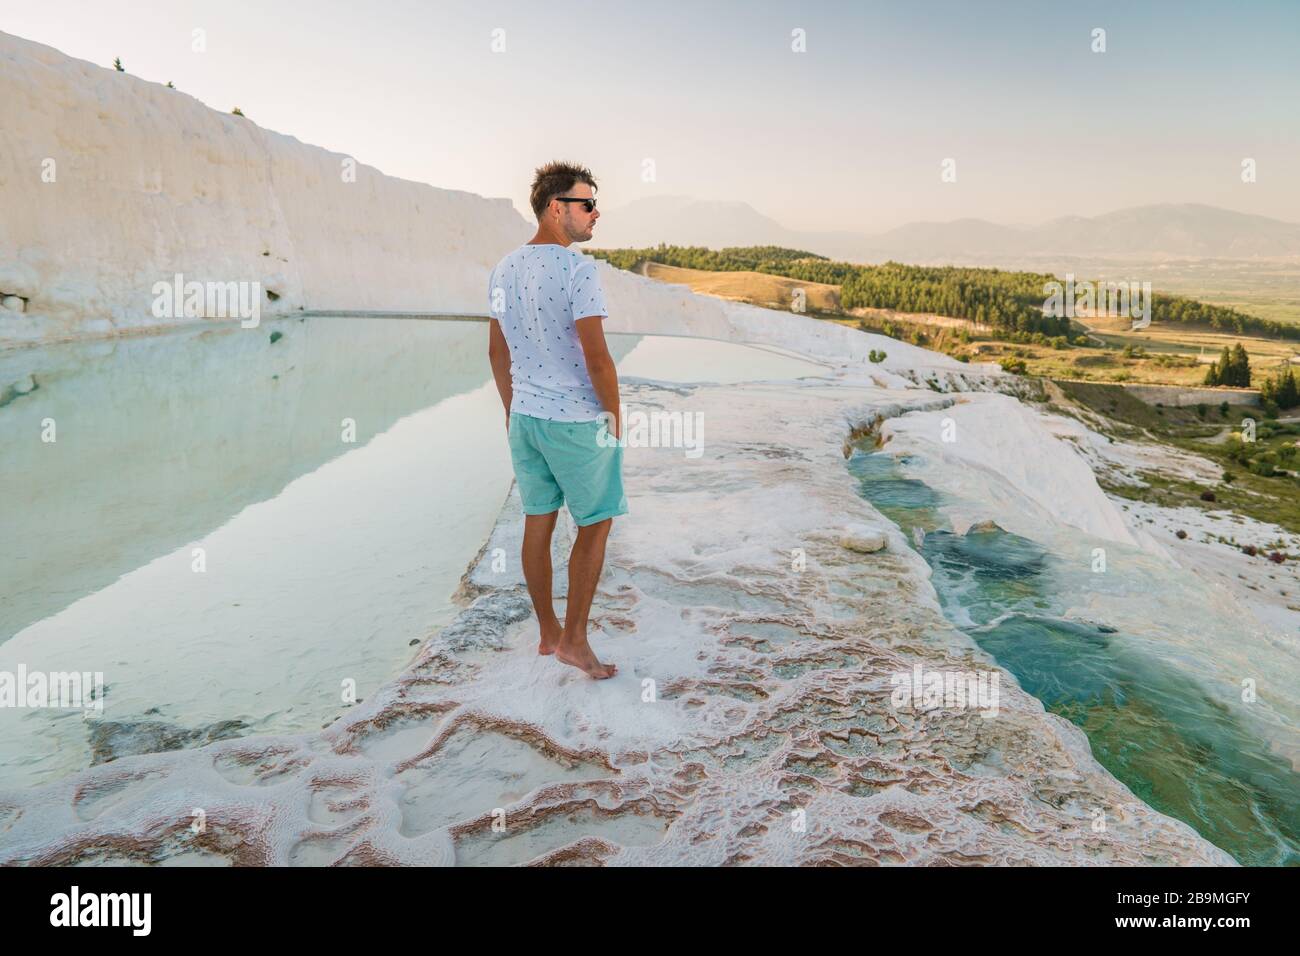 Turkey, Natural travertine pools and terraces in Pamukkale. Cotton castle in southwestern Turkey, man tourist by natural pool Pamukkale Stock Photo